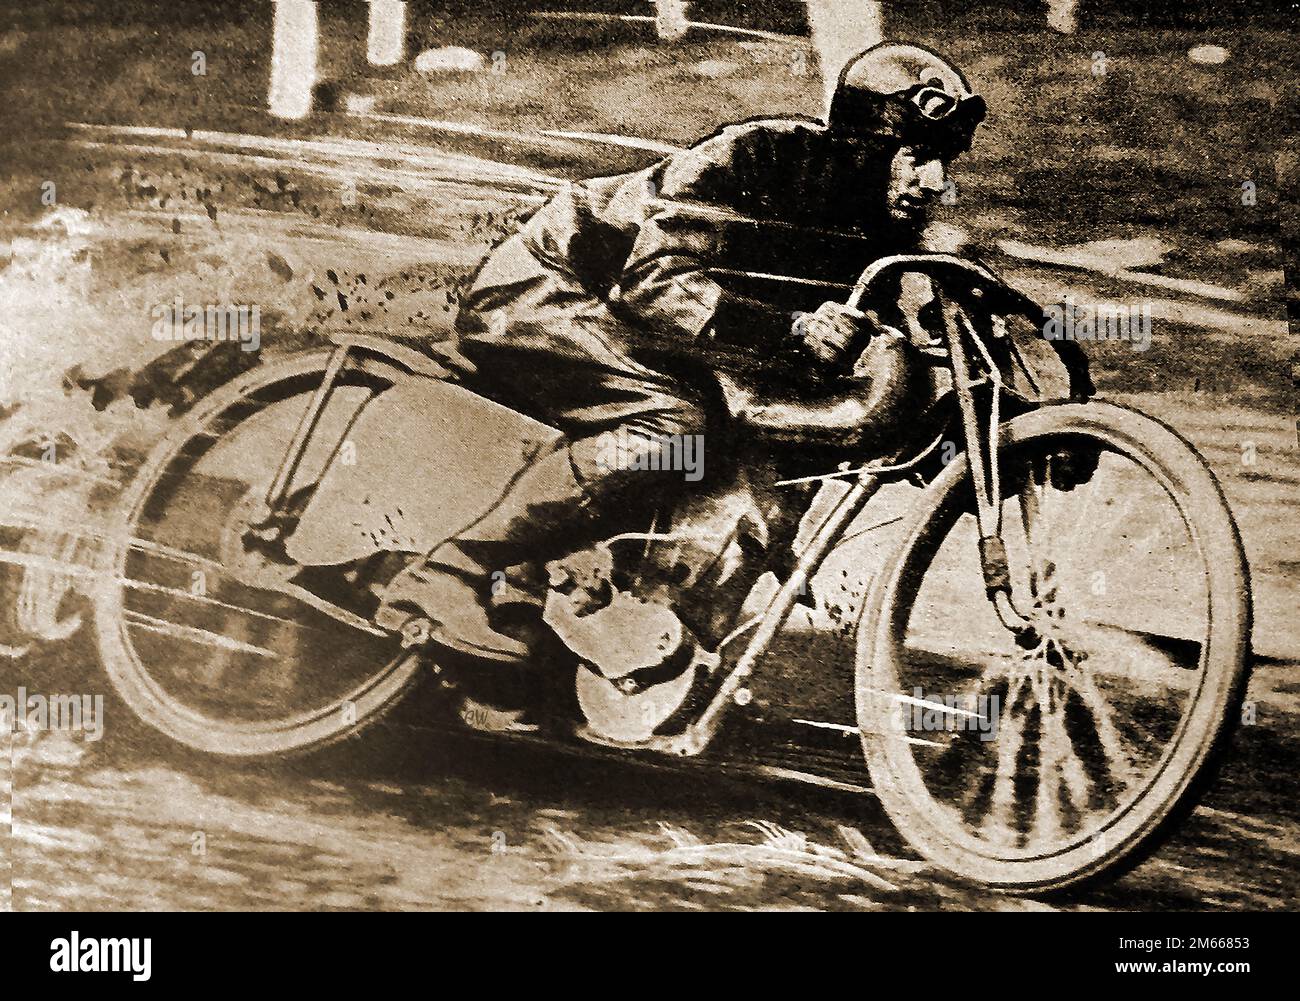 A 1930 portrait of  Australian & International dirt-track rider Frank Arthur in action at the London Speedway, UK.  Fully named Harold Frank Milton Arthur (born 12 December 1908 in Lismore, New South Wales – died 11 September 1972 in Sydney)   He was an international motorcycle speedway rider who won the first Star Riders' Championship, Stock Photo